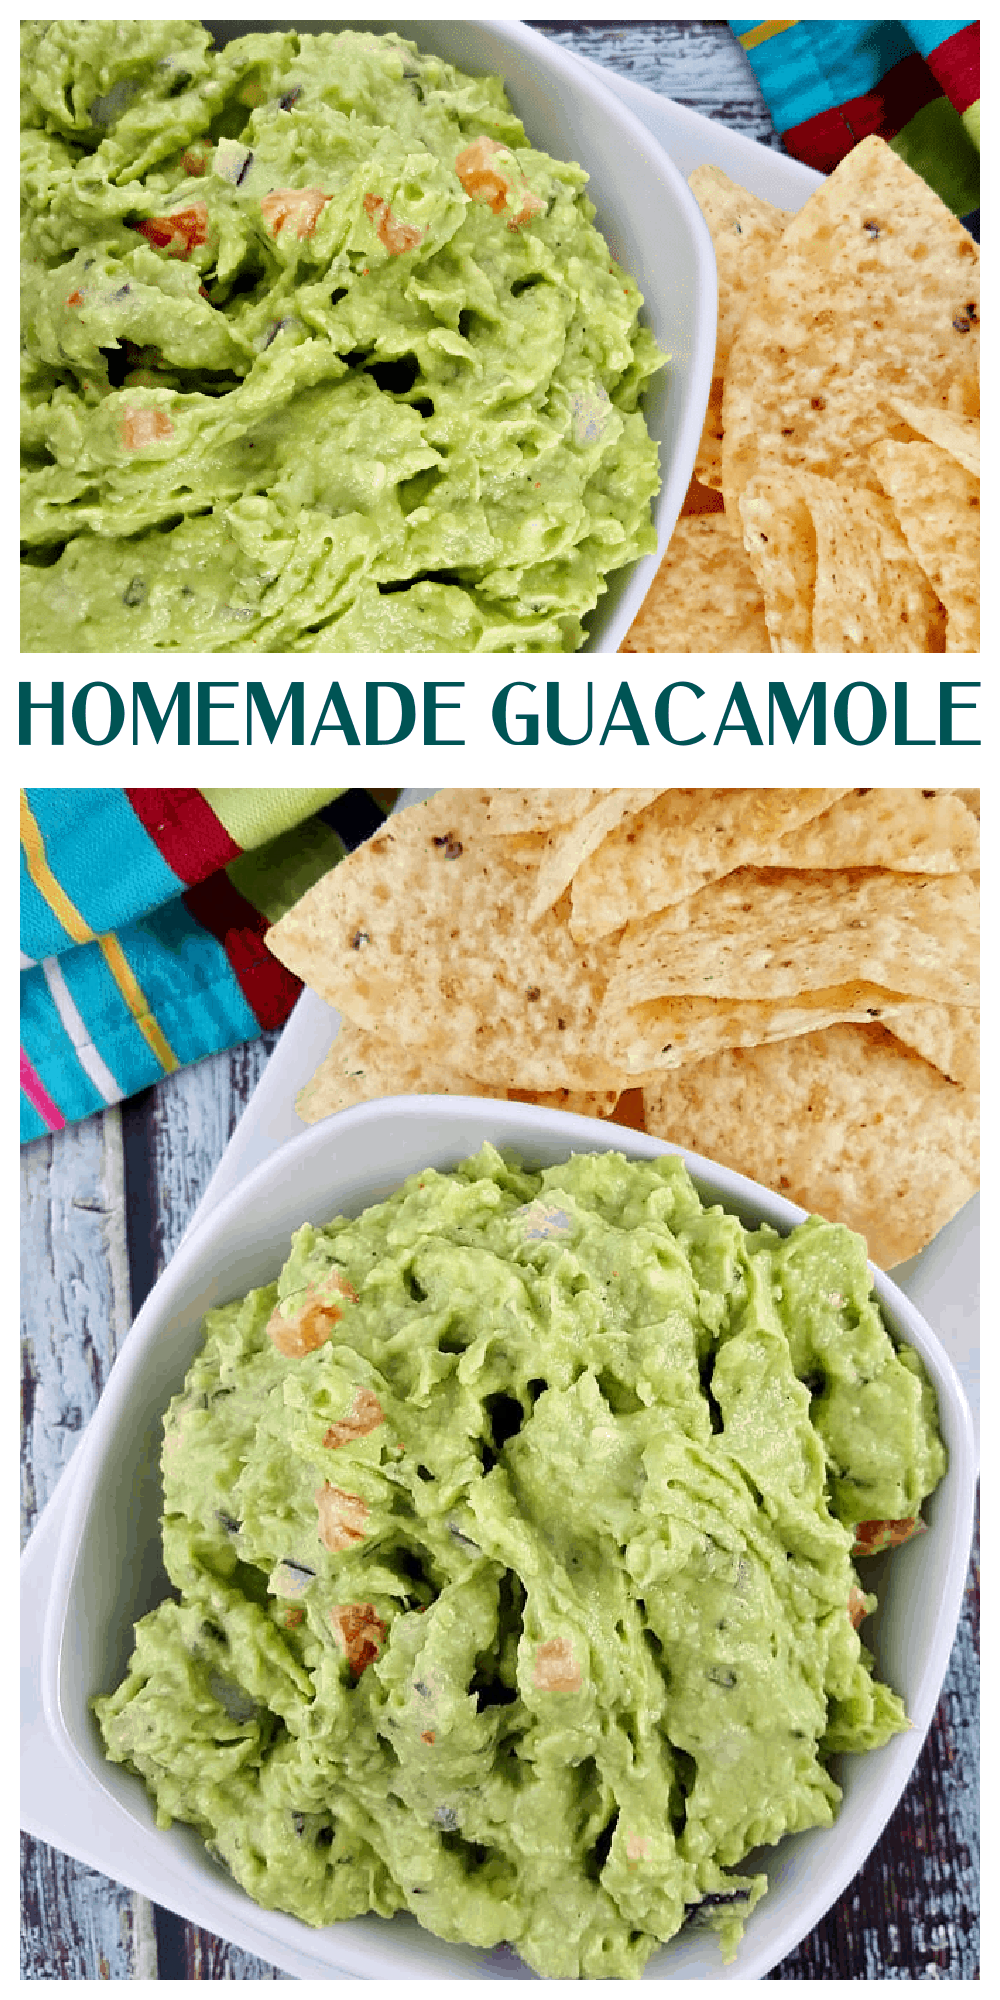 You can make restaurant-quality guacamole at home with this easy Homemade Guacamole recipe using fresh ingredients. via @jugglingactmama